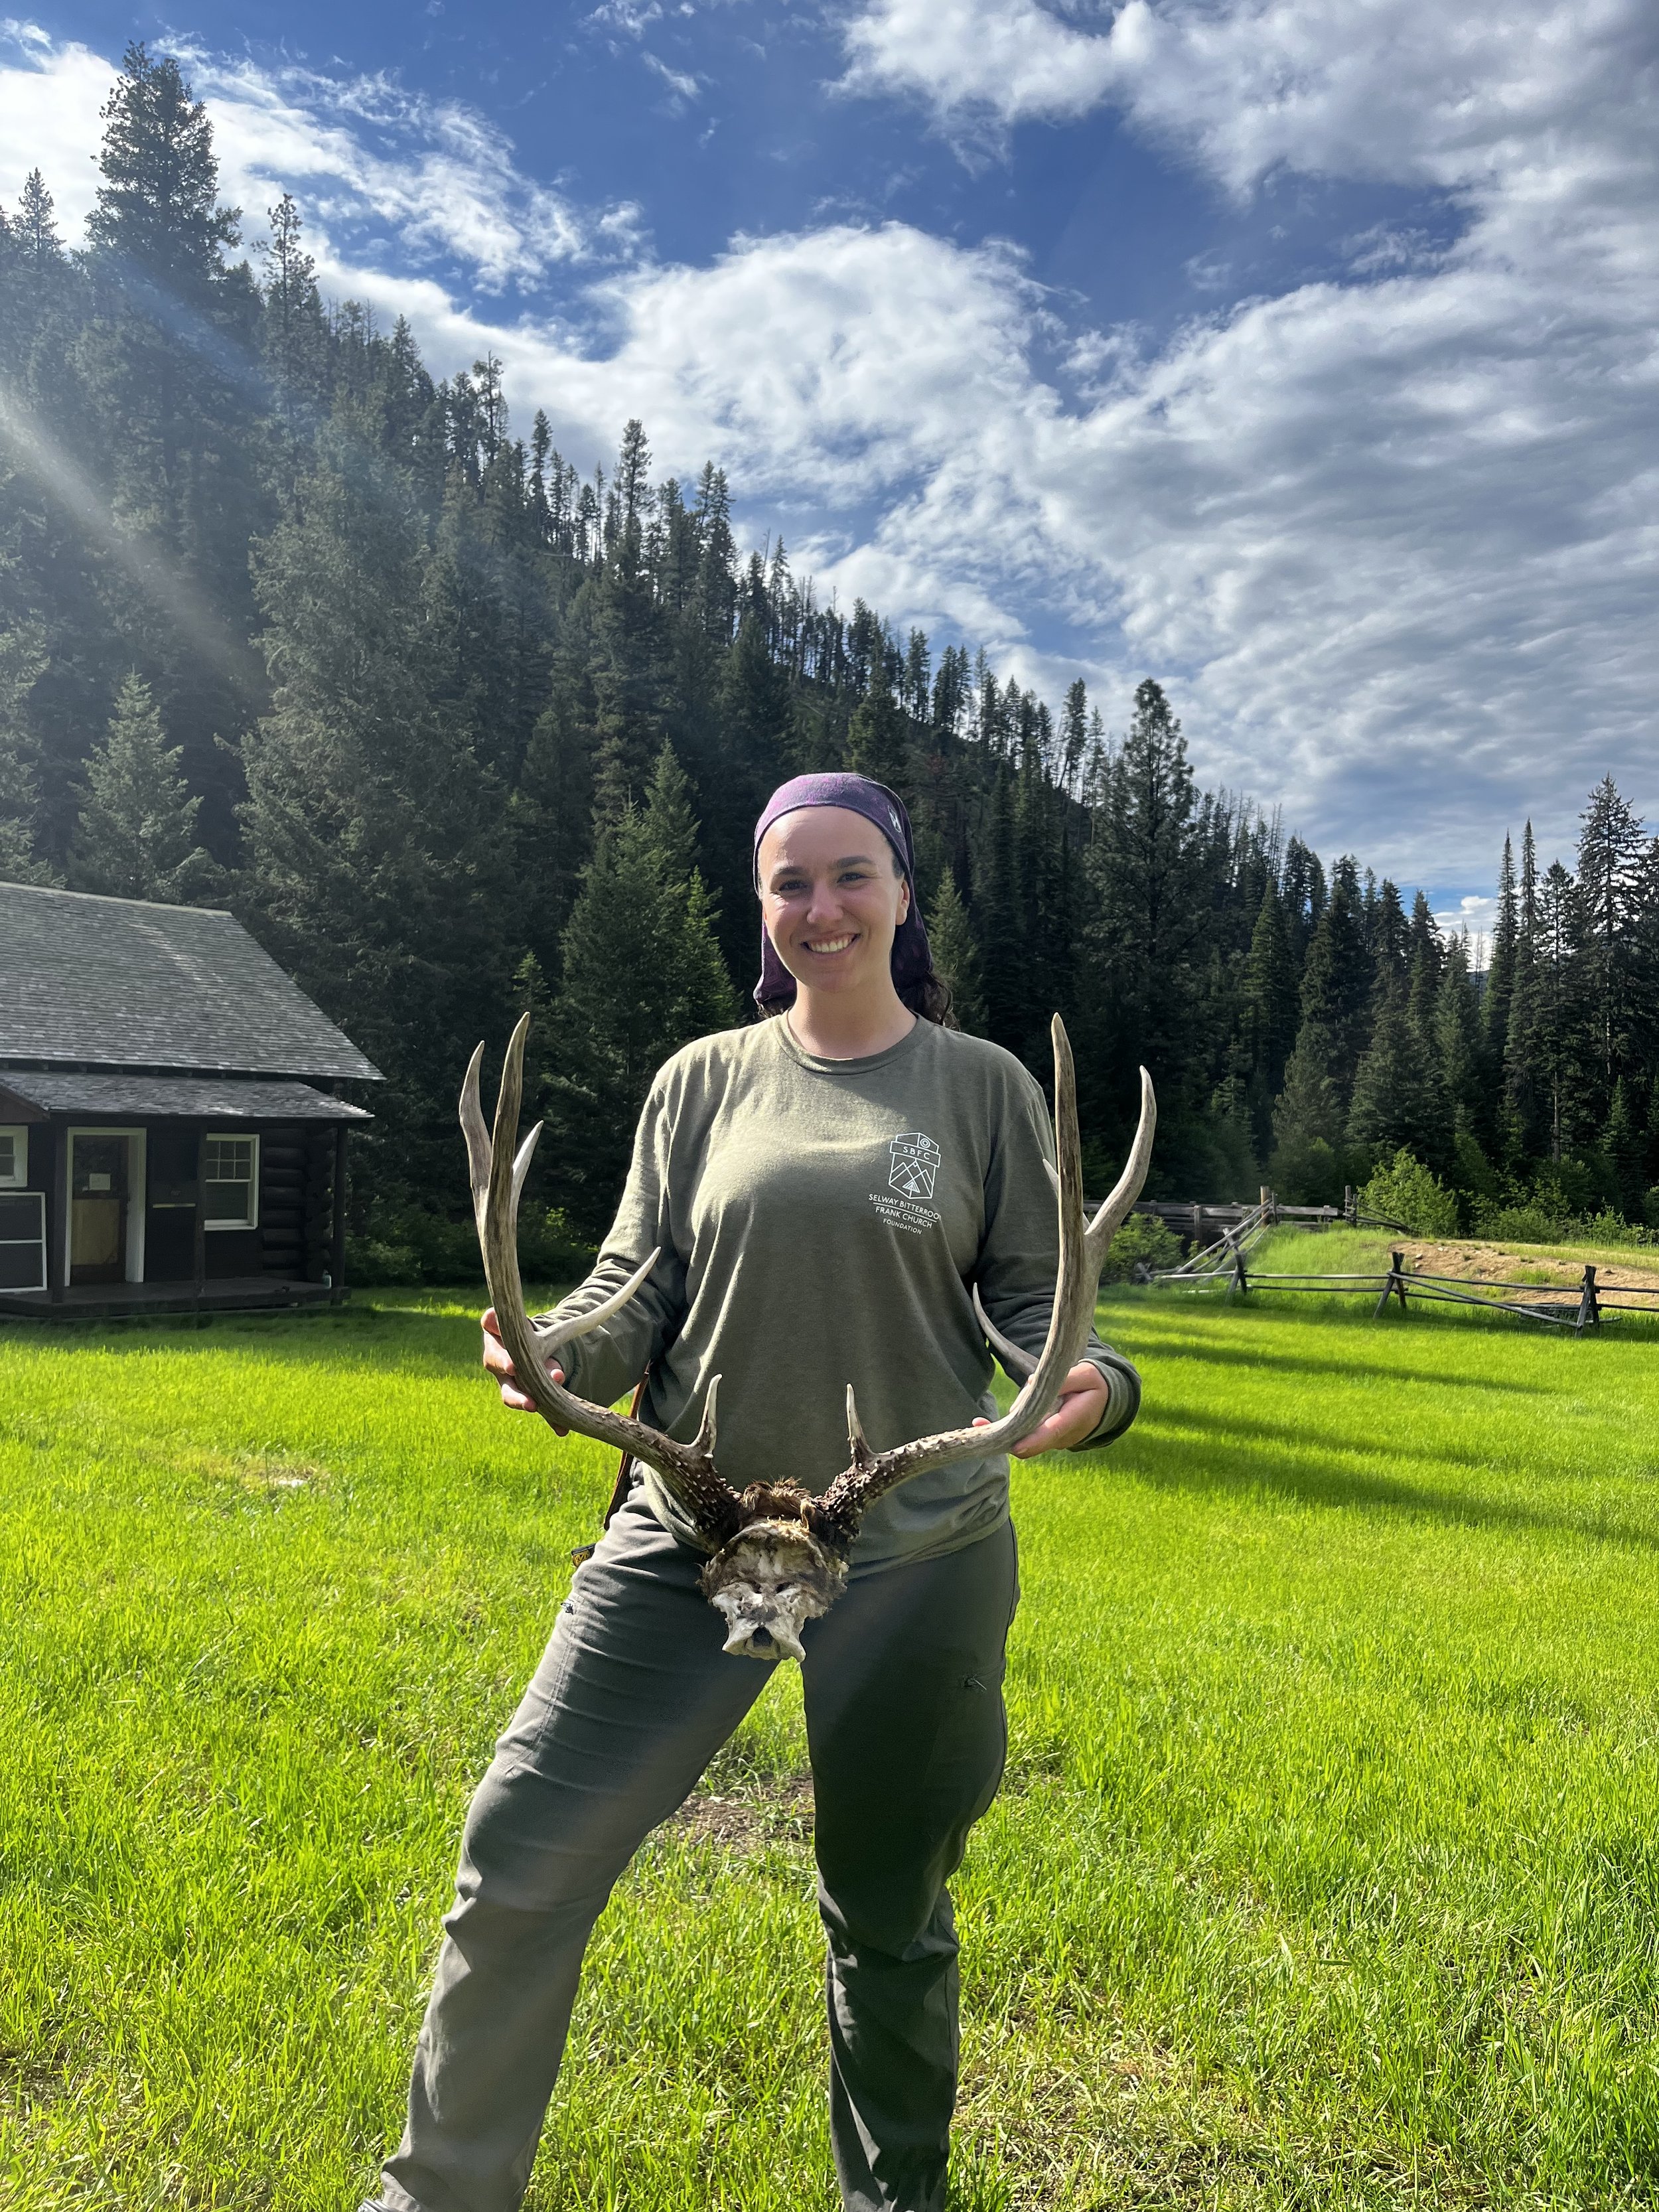    Hannah Richter with a prize shed, Magruder RS, Bitterroot NF, Frank Church Wilderness, photo by Reyna Rodriguez   